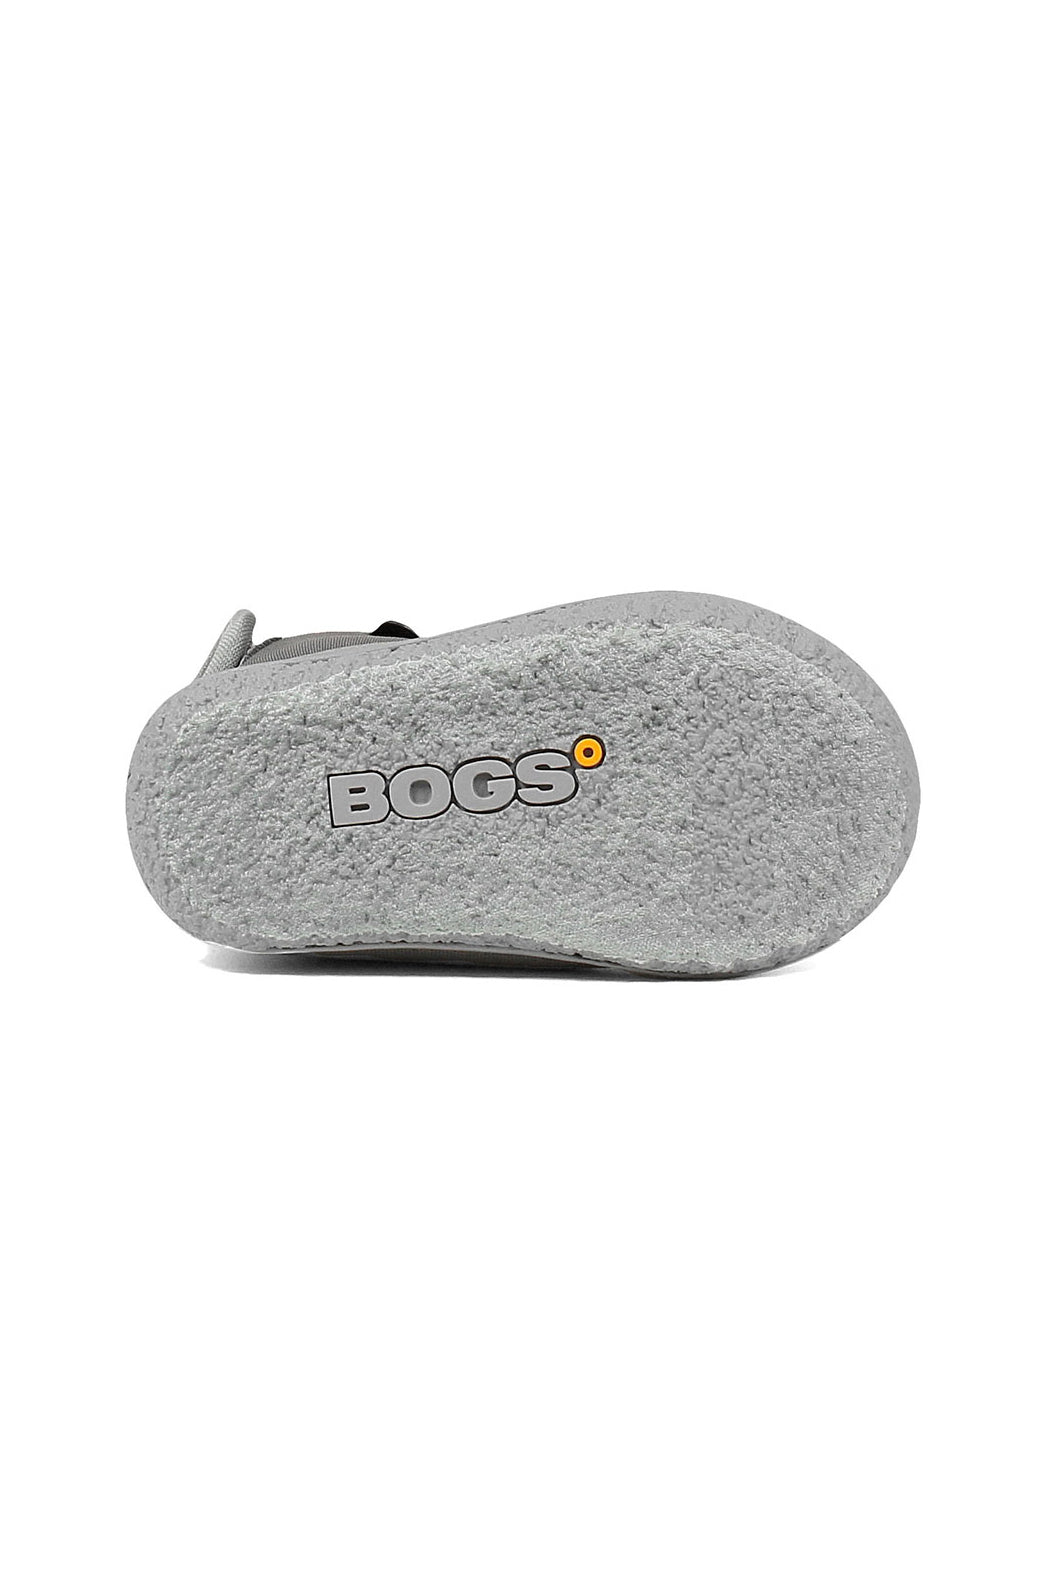 BOGS Baby Bogs Solid Waterproof Insulated Boots